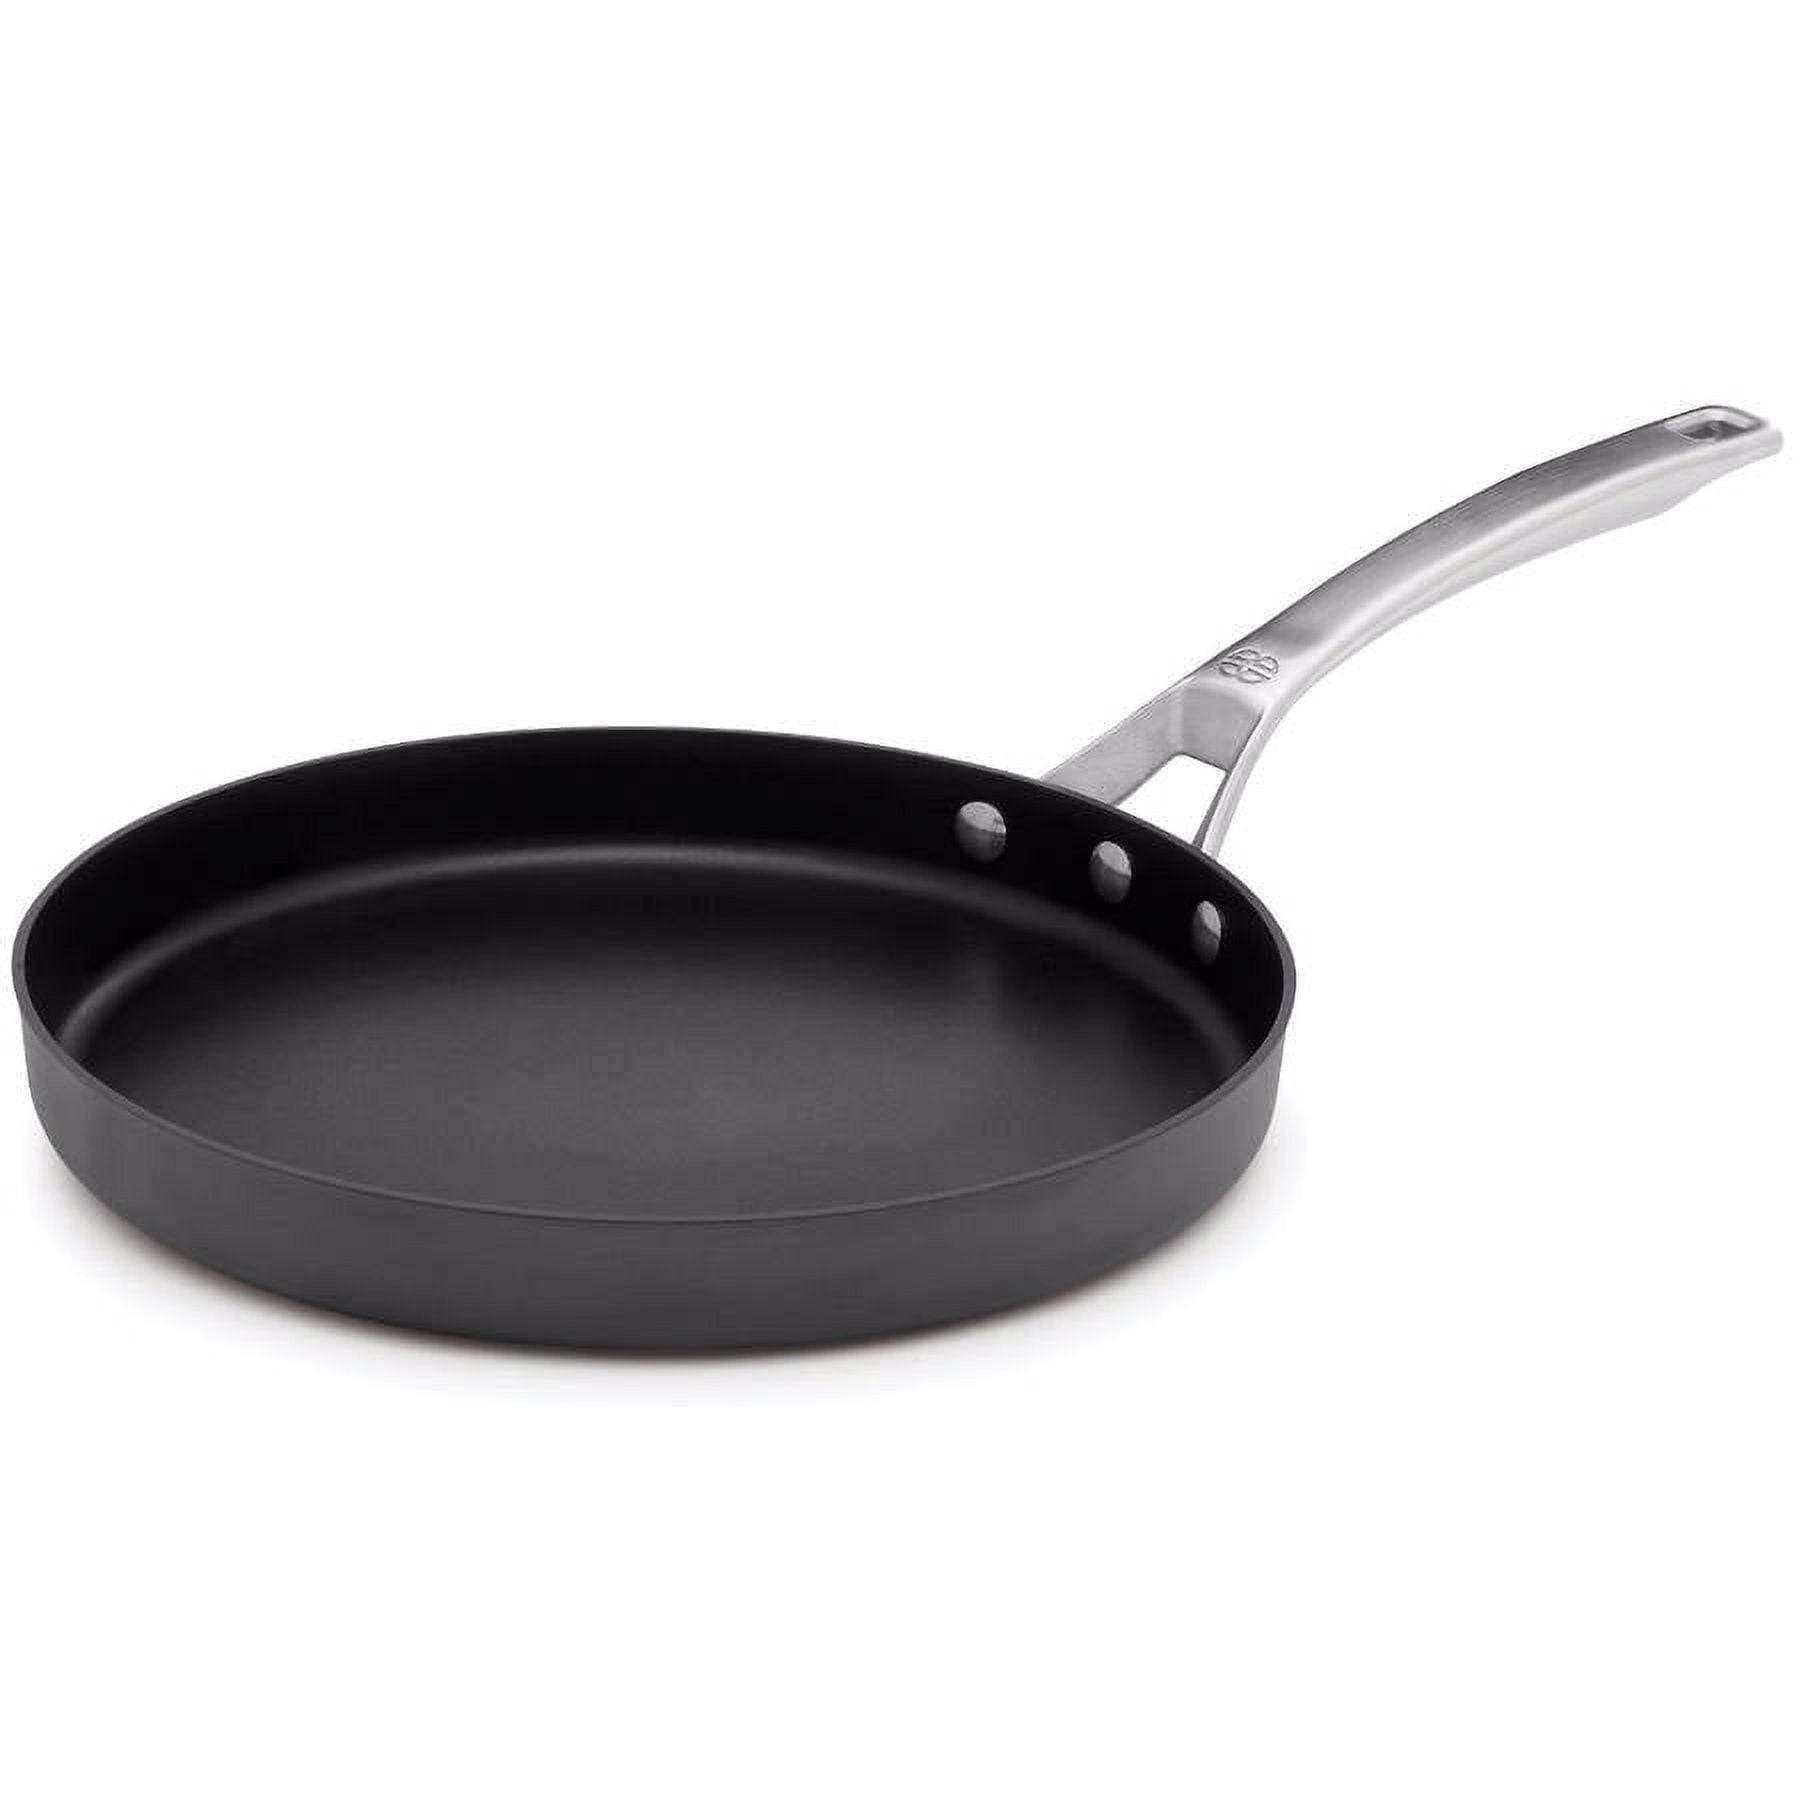 Calphalon Anodized 13 Large Griddle Pan Skillet Nonstick Groove Pizza